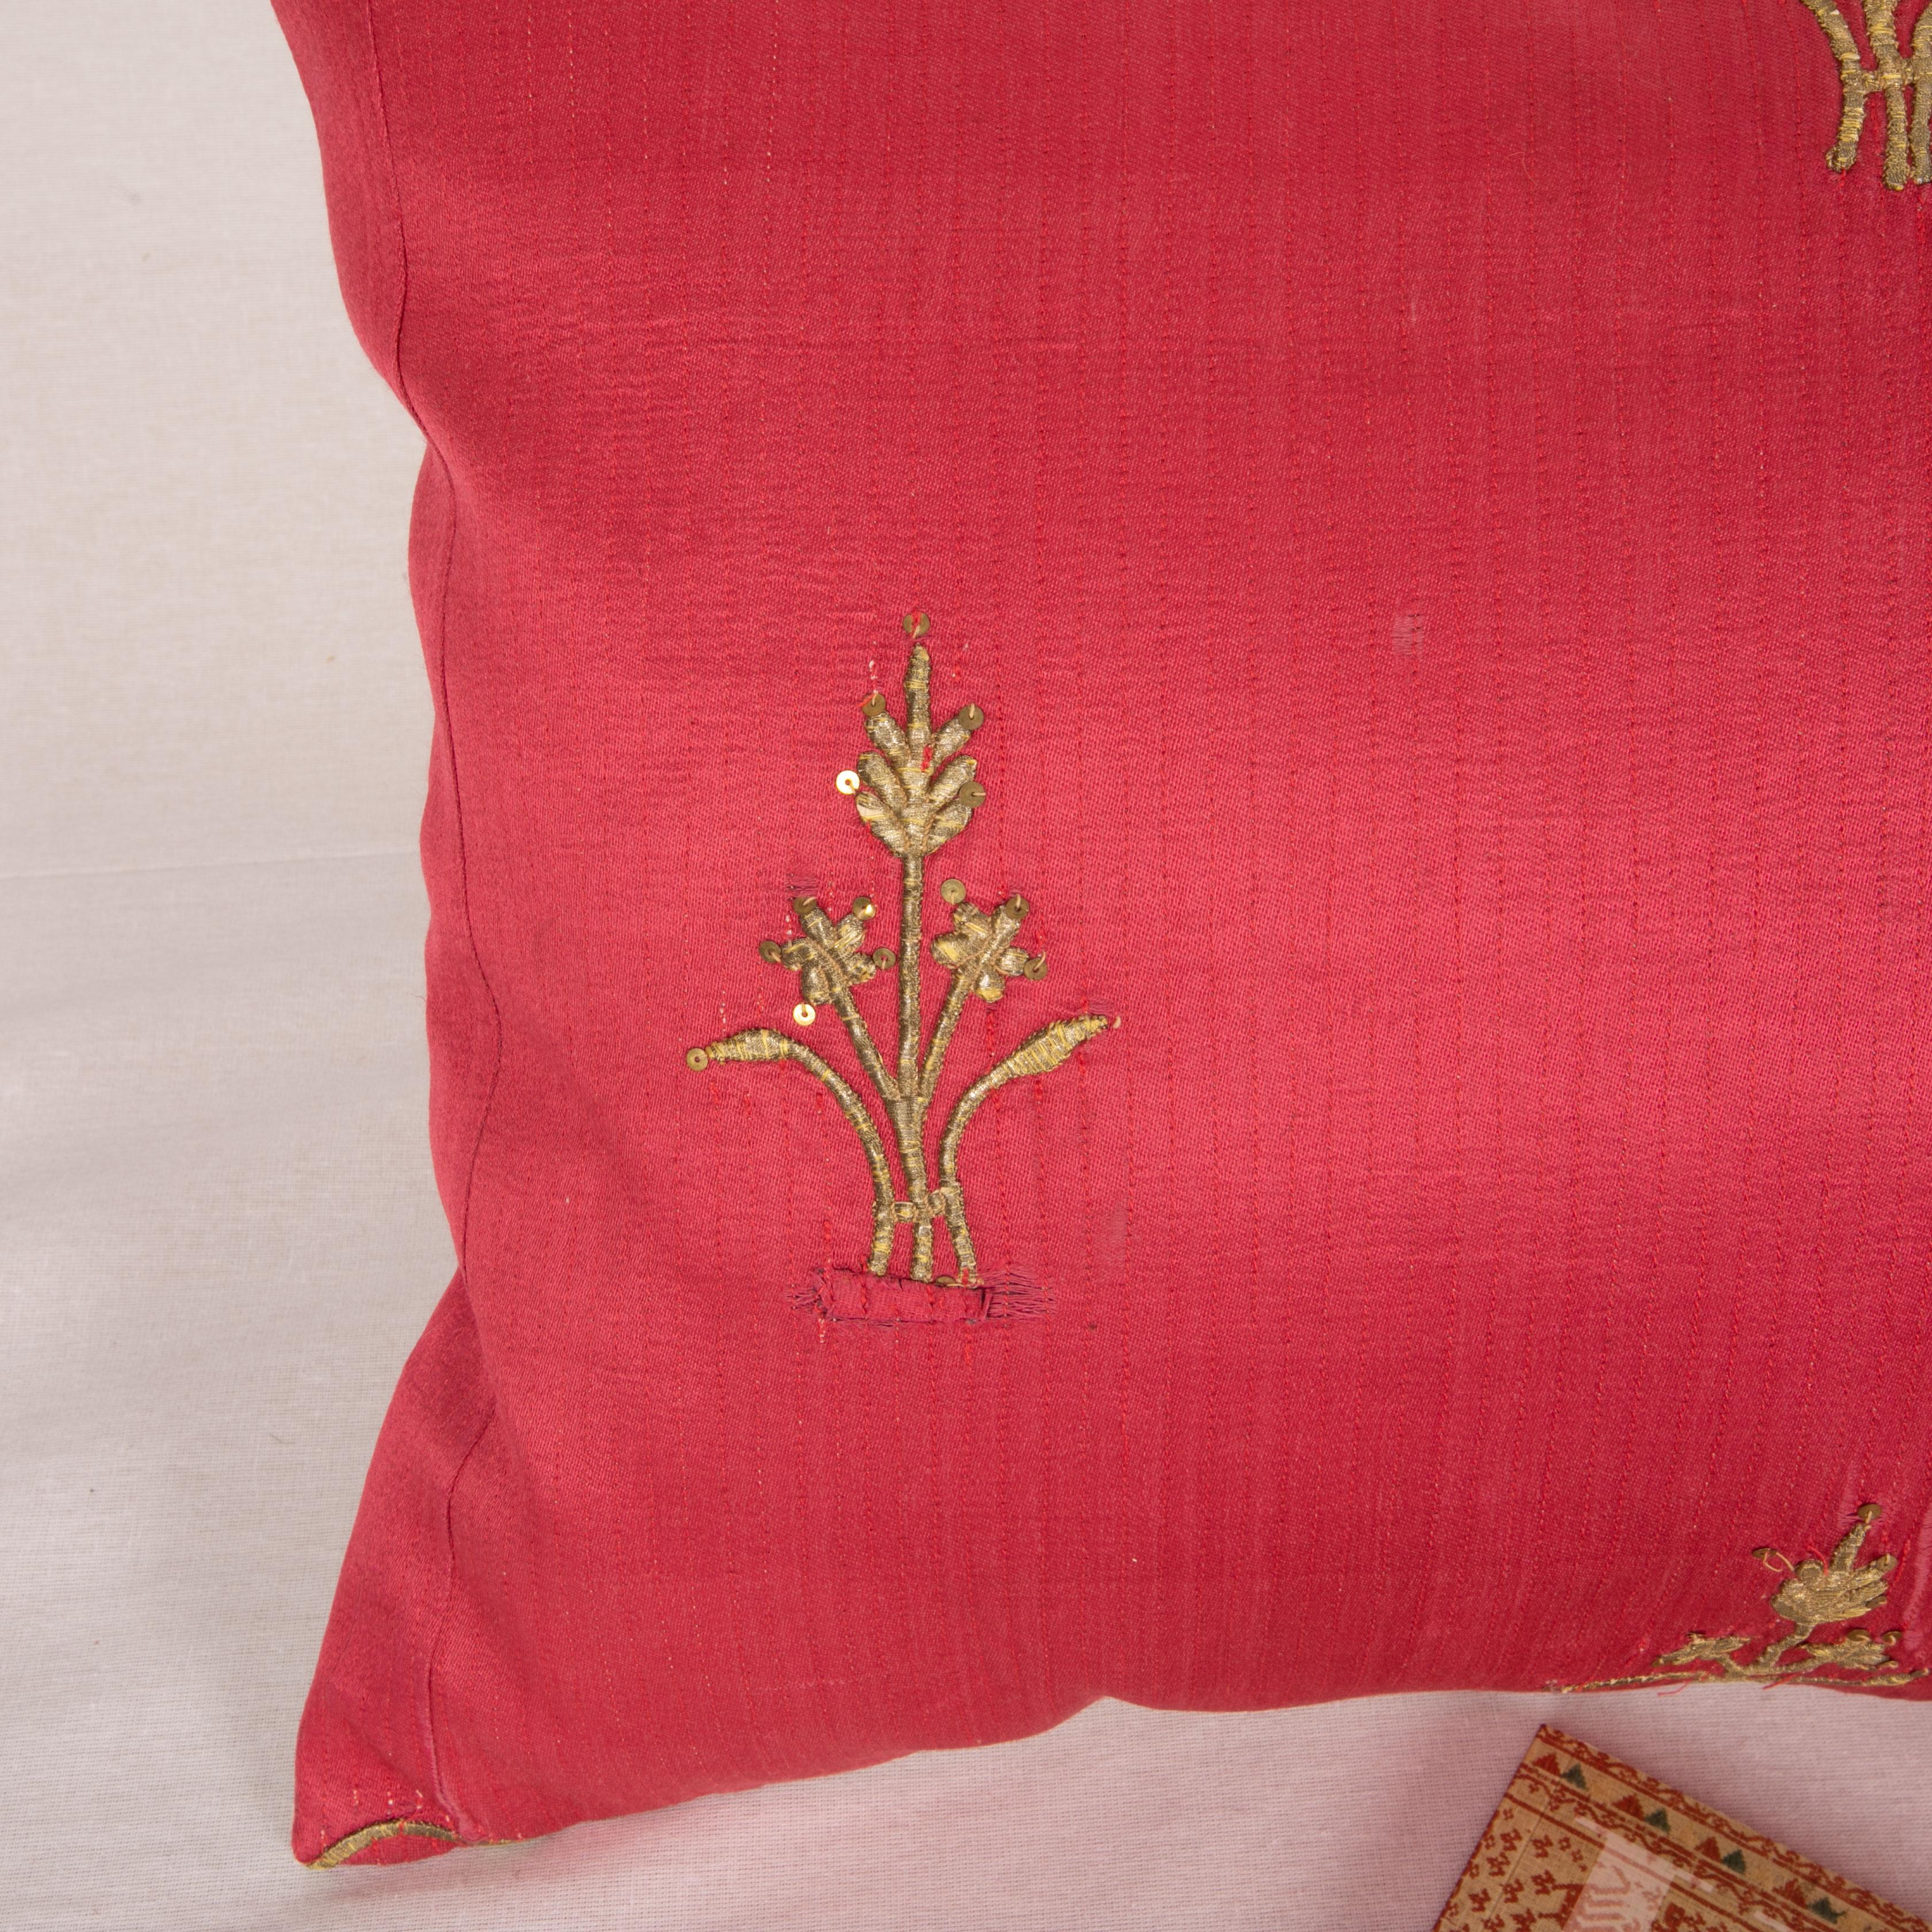 Embroidered Antique Ottoman Turkish Pillowcase, Late 19th C. For Sale